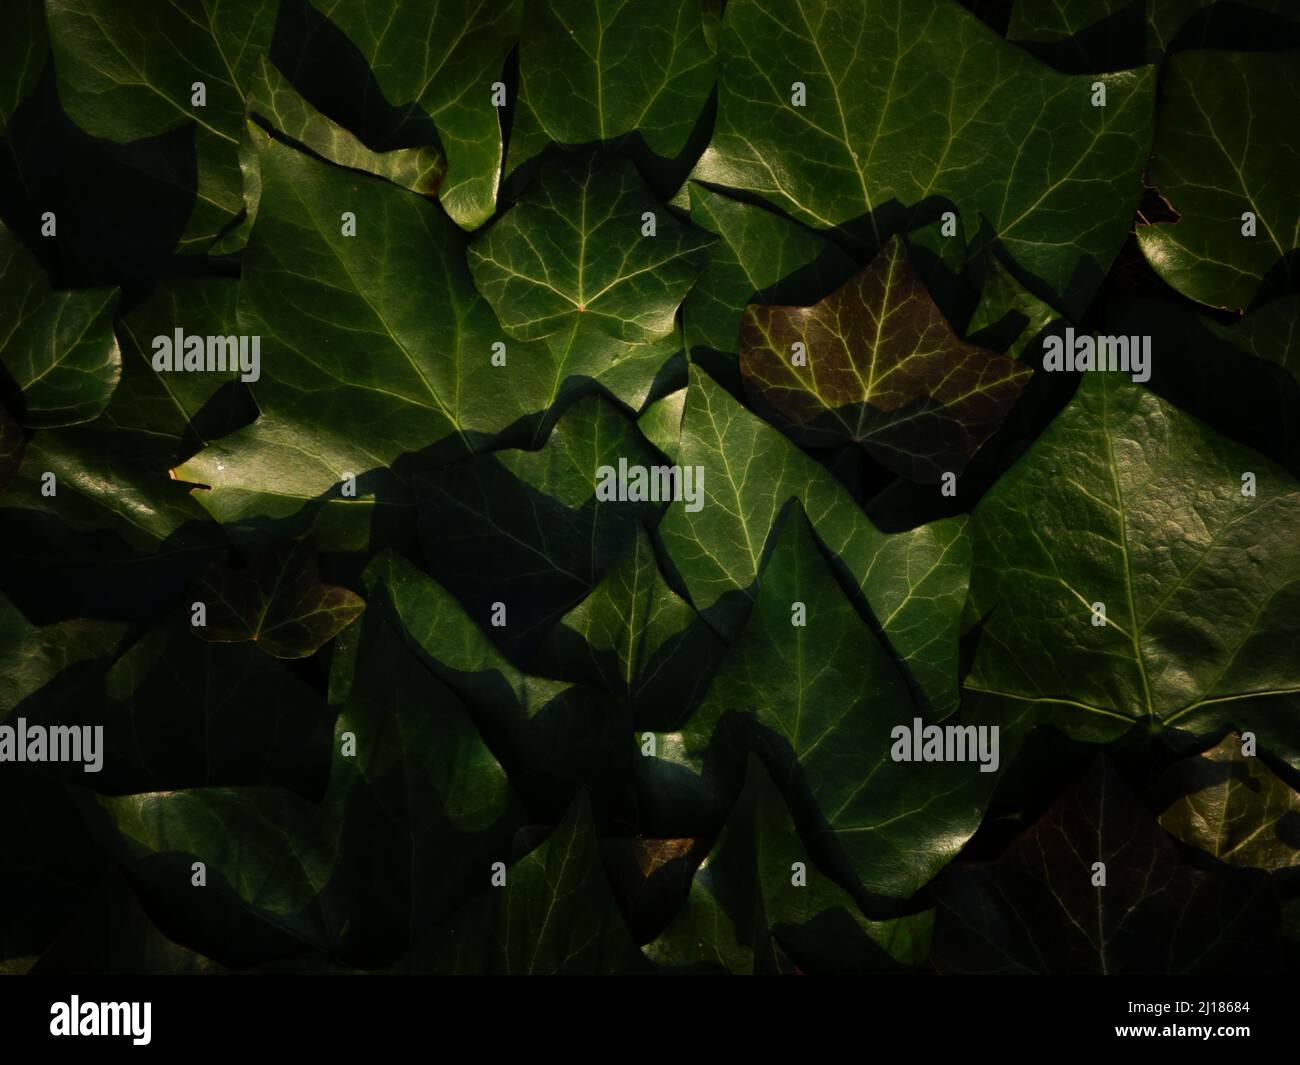 Calm background of nuances of green ivy foliage or ivy leafage perfect as template or background or inspiration for a card, a scrapbook or a website. Stock Photo